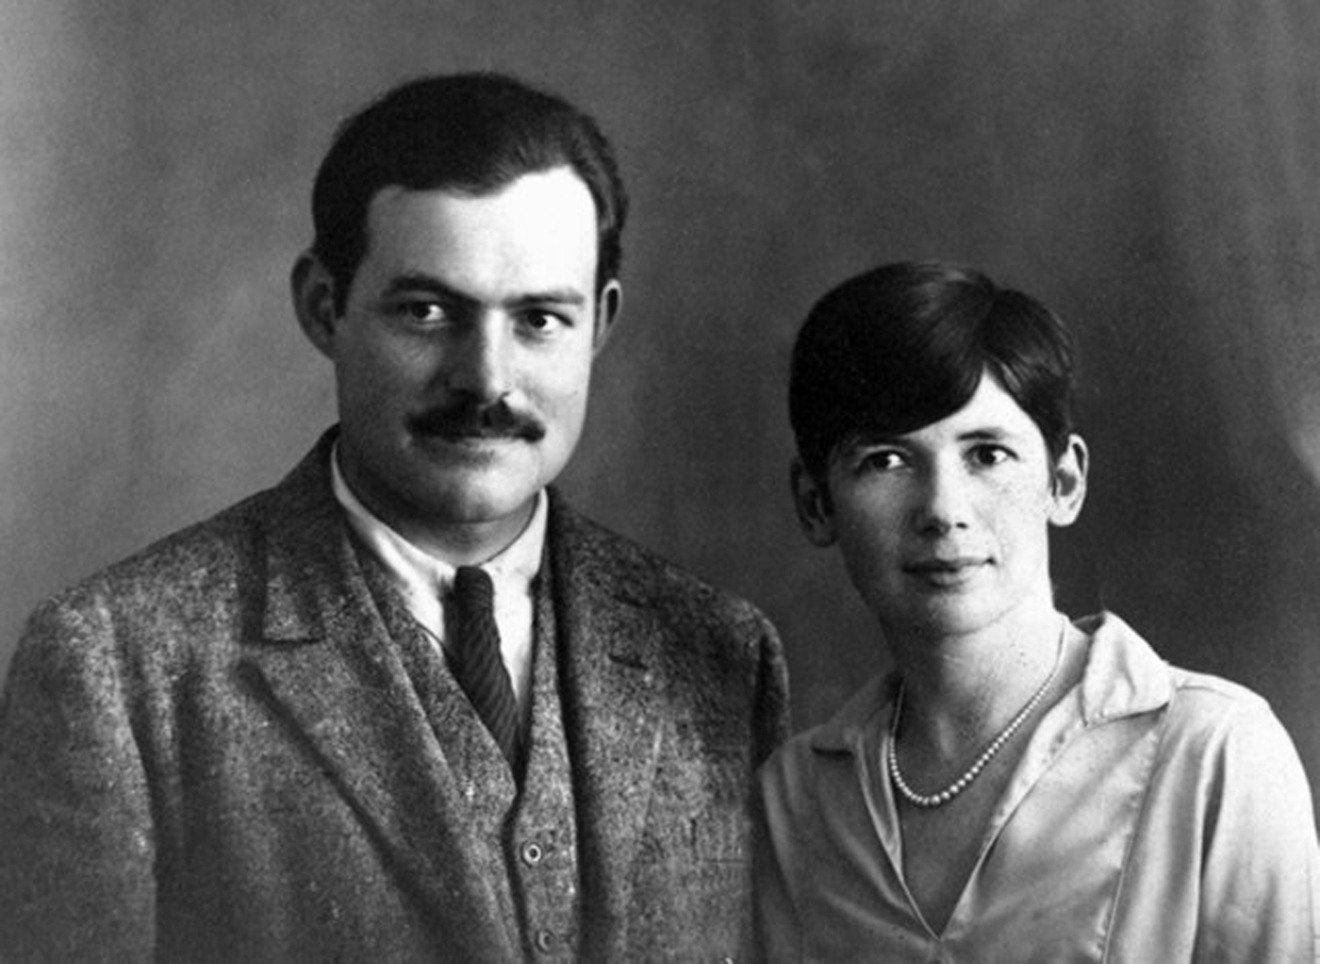 The marriage of Ernest and Pauline Hemingway, shown on their wedding day in Paris in 1927, offers an emotional and suspenseful story arc for Darla Worden’s Hemingway biography “Cockeyed Happy.”